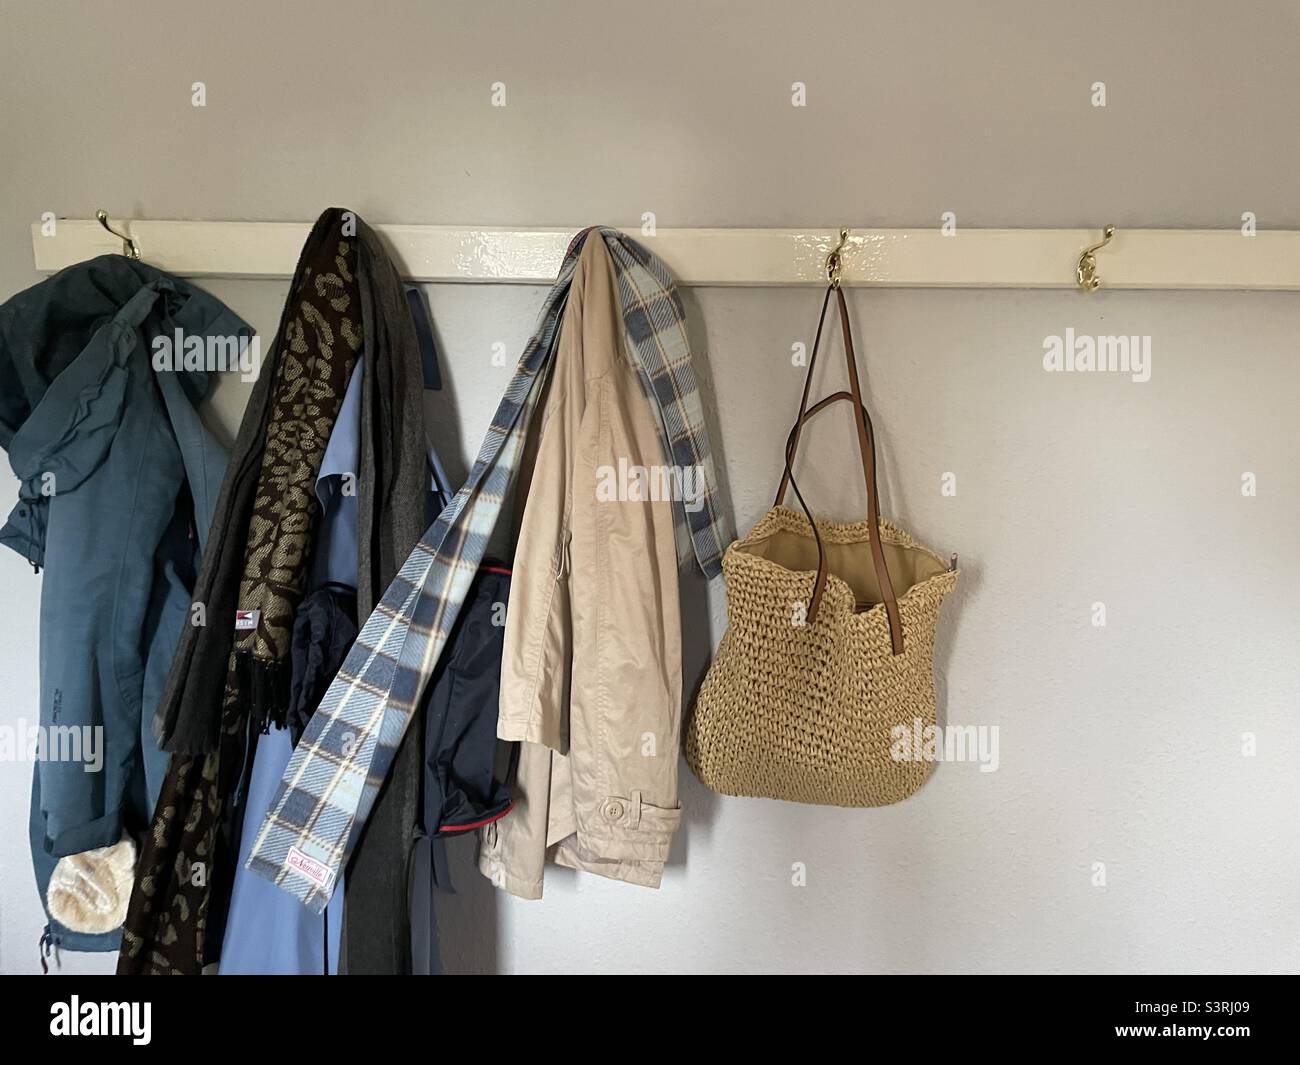 Coats and bags hanging up Stock Photo